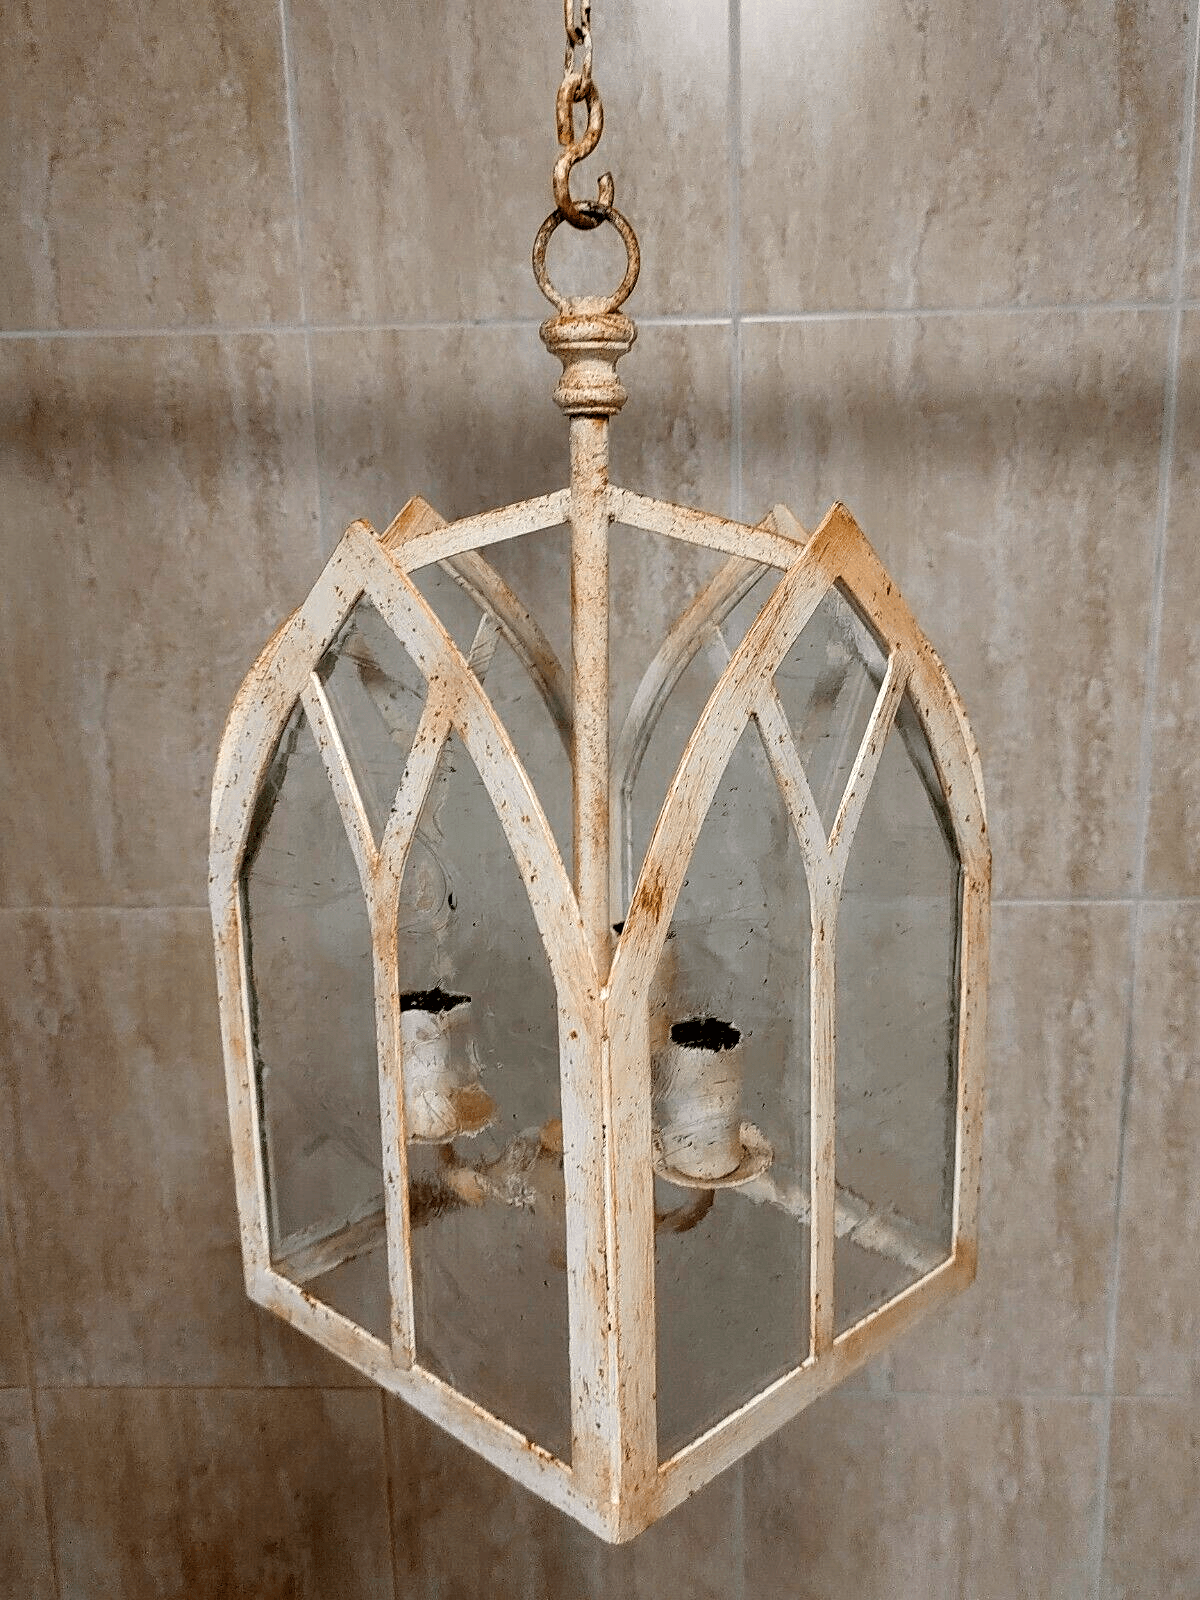 20th Century Gothic Revival Church Window Hanging Ceiling Lantern Light Pendant Glass & Metal - Tommy's Treasure